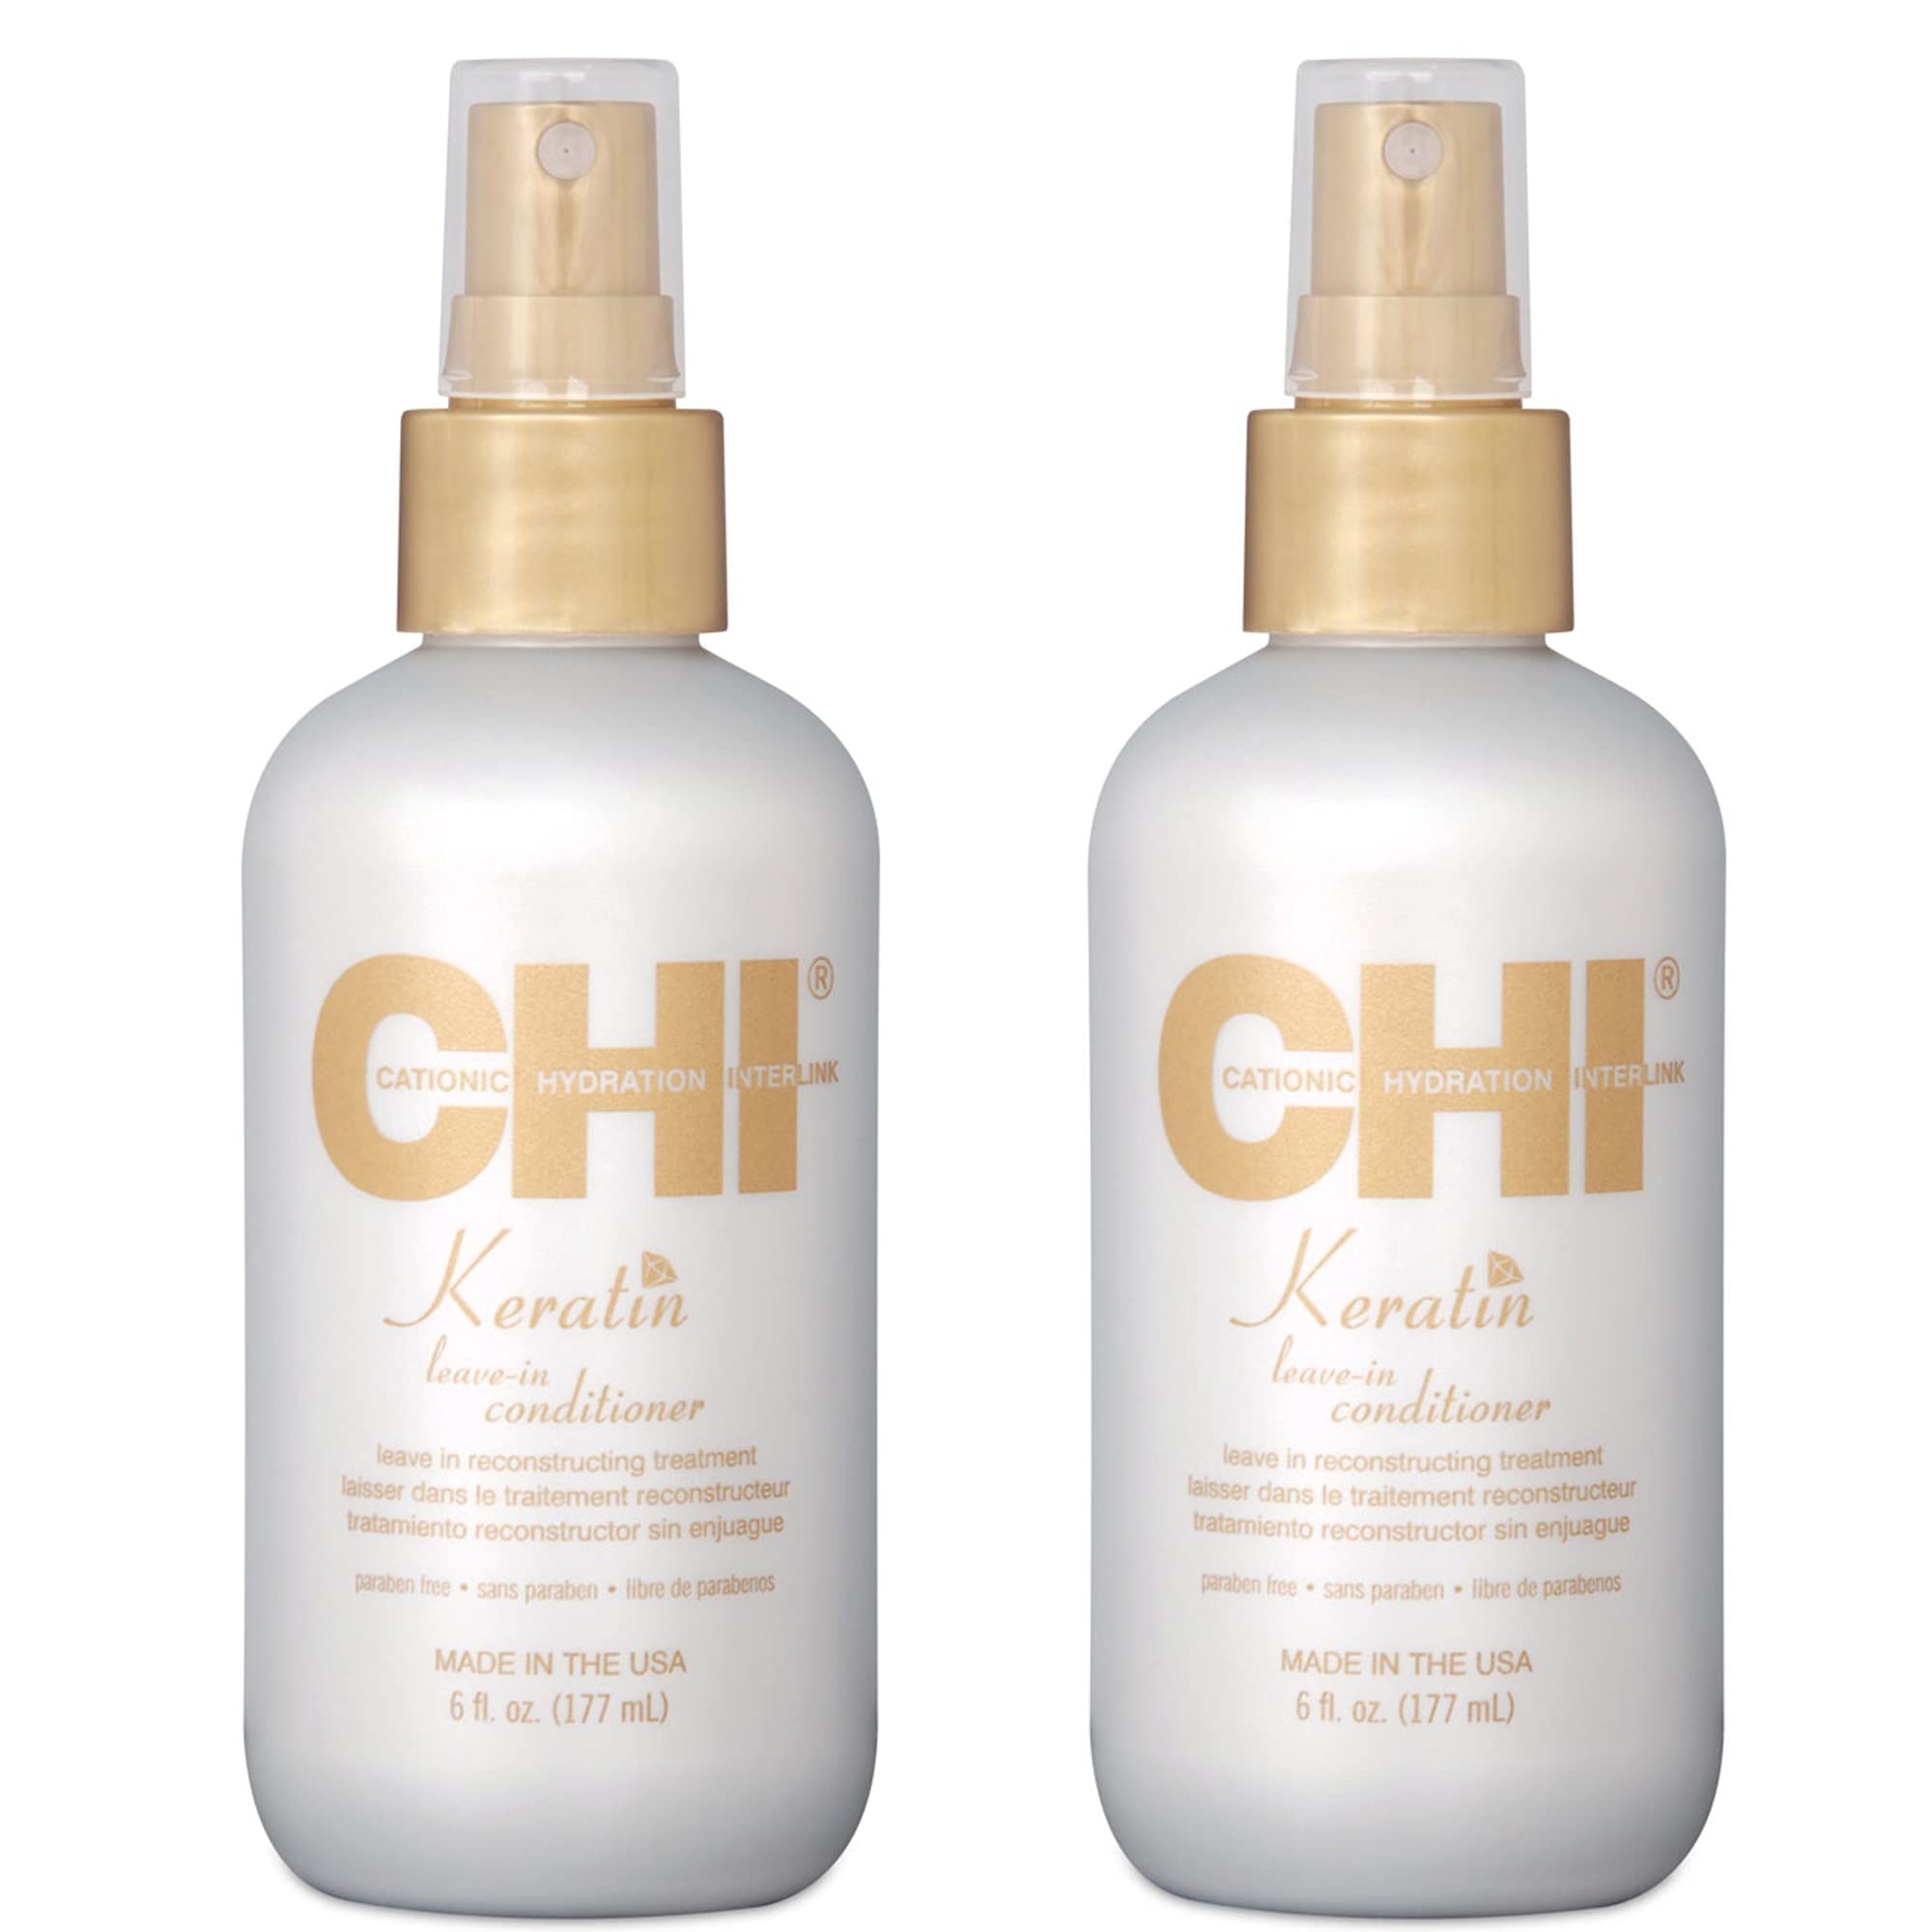 CHI Keratin Leave-in Conditioner, White, 12 Oz, Pack of 2